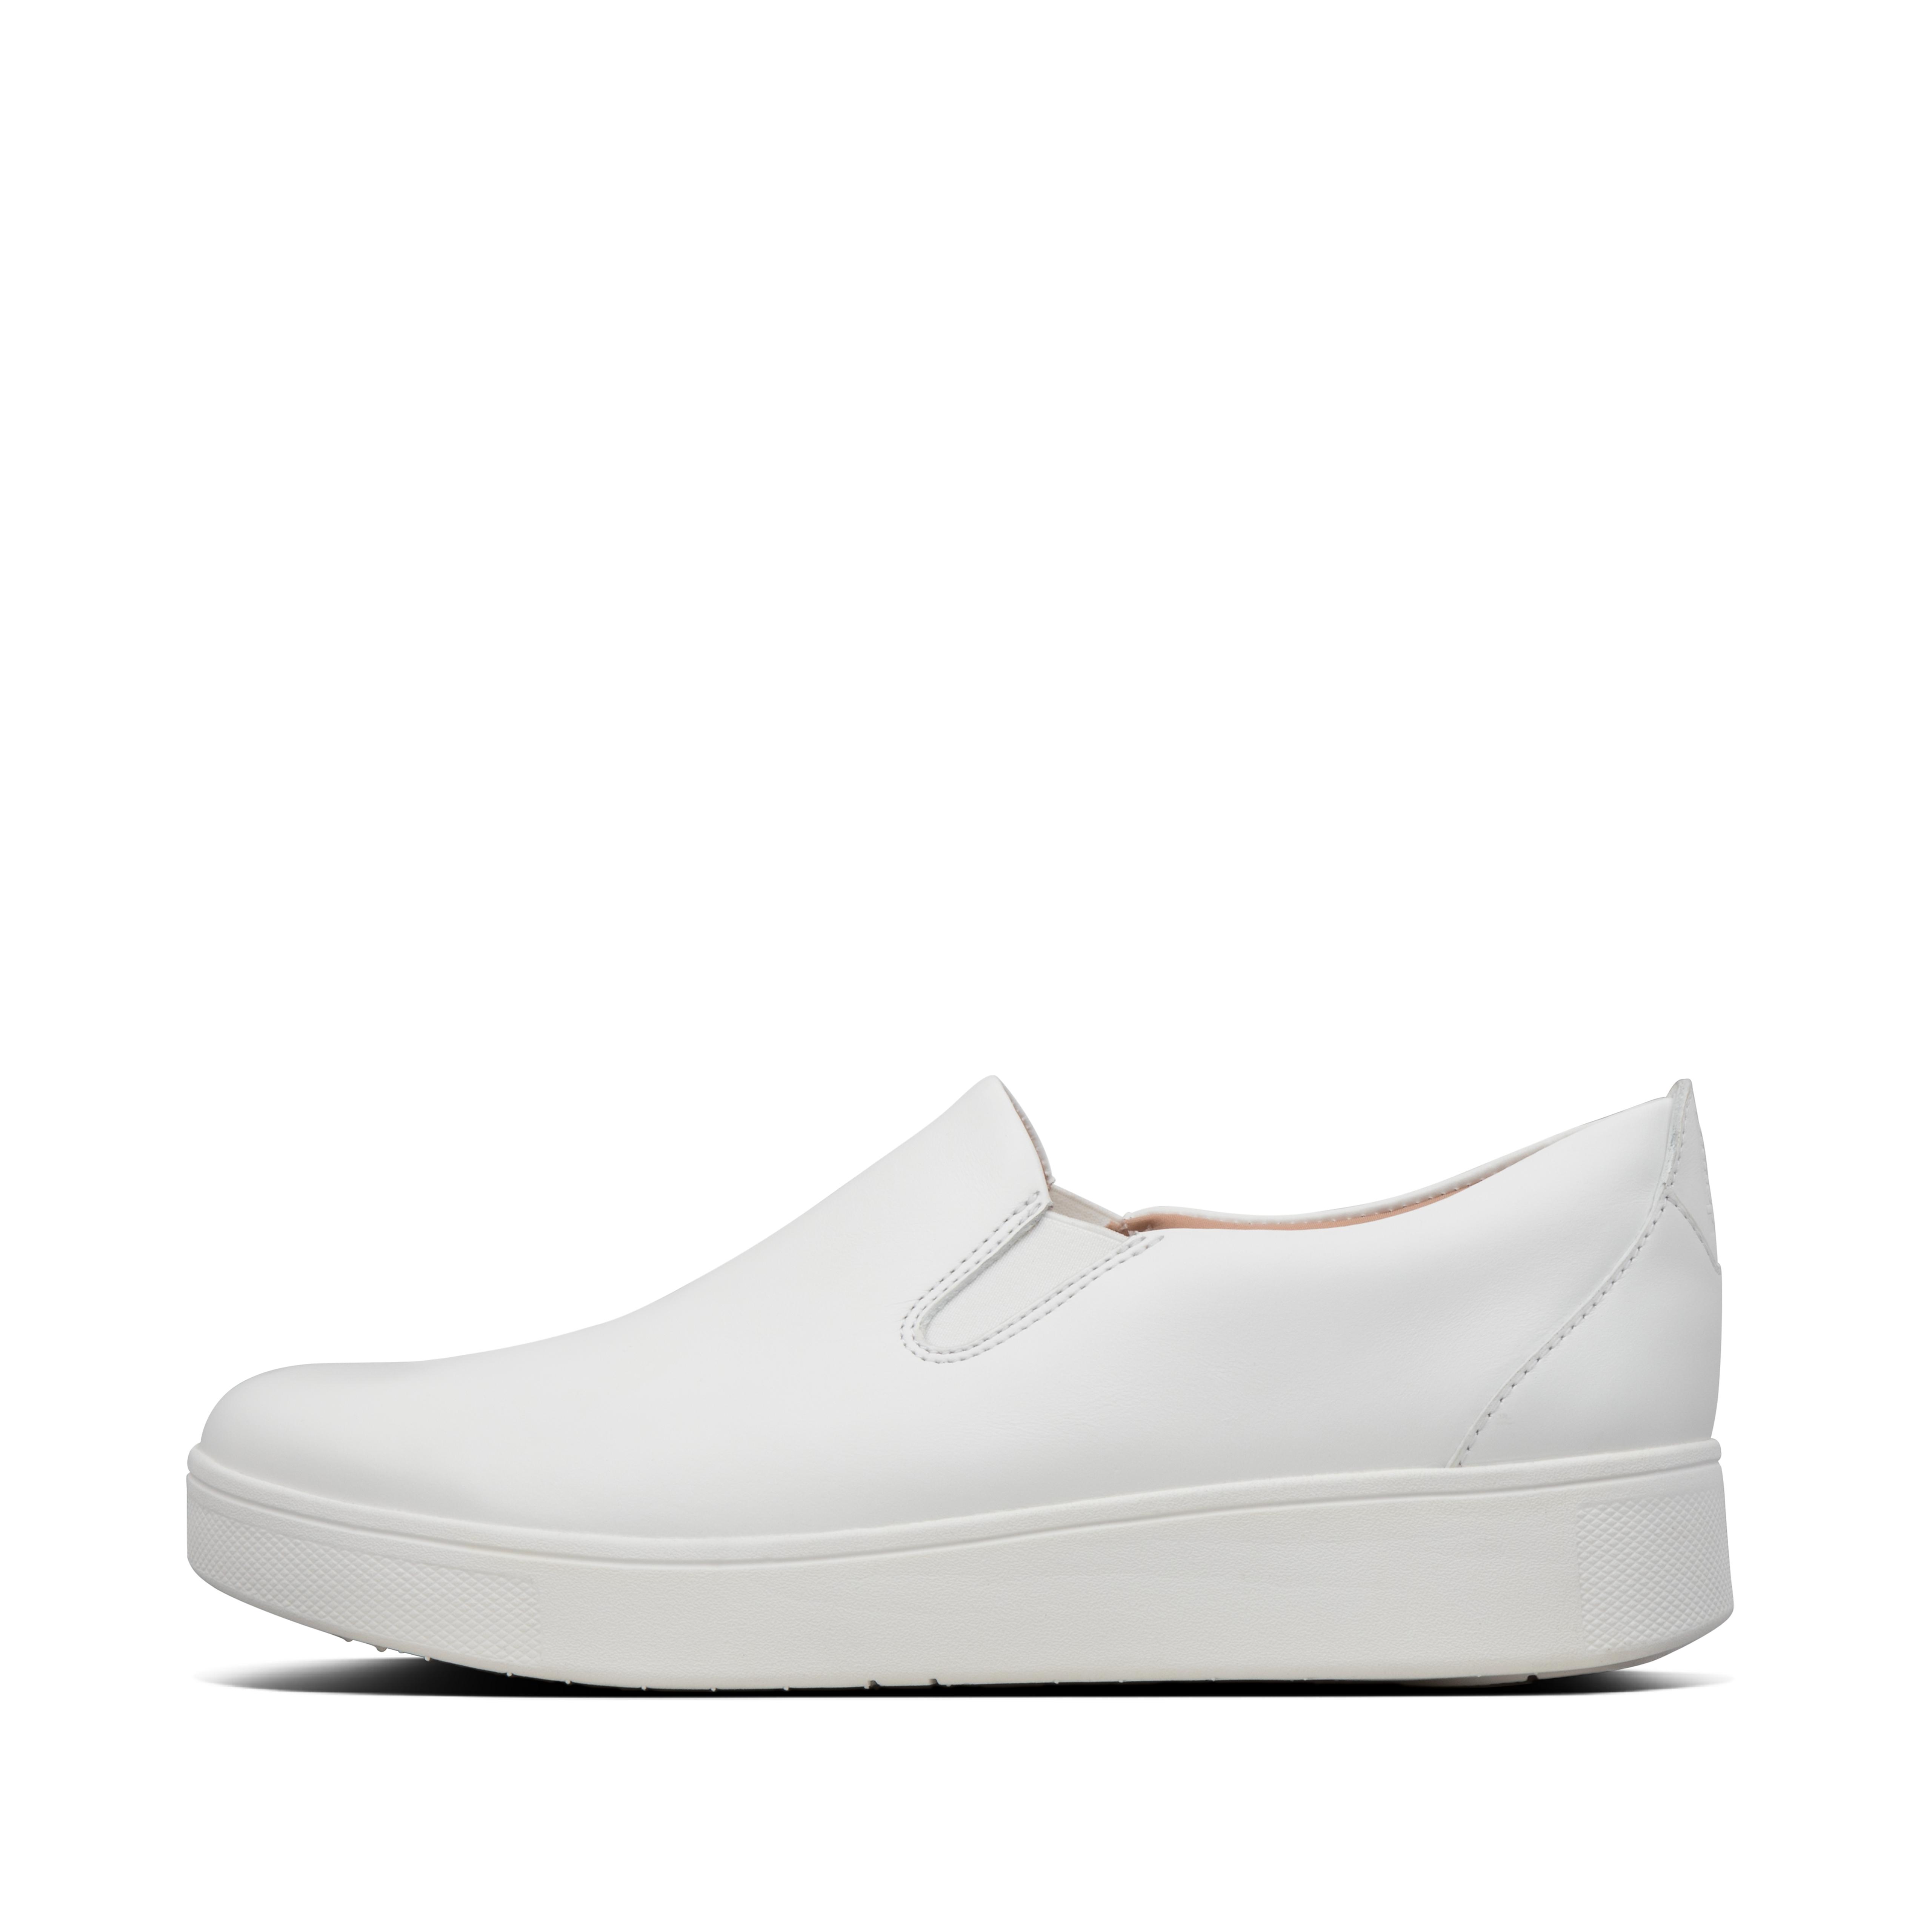 leather slip on skate shoes